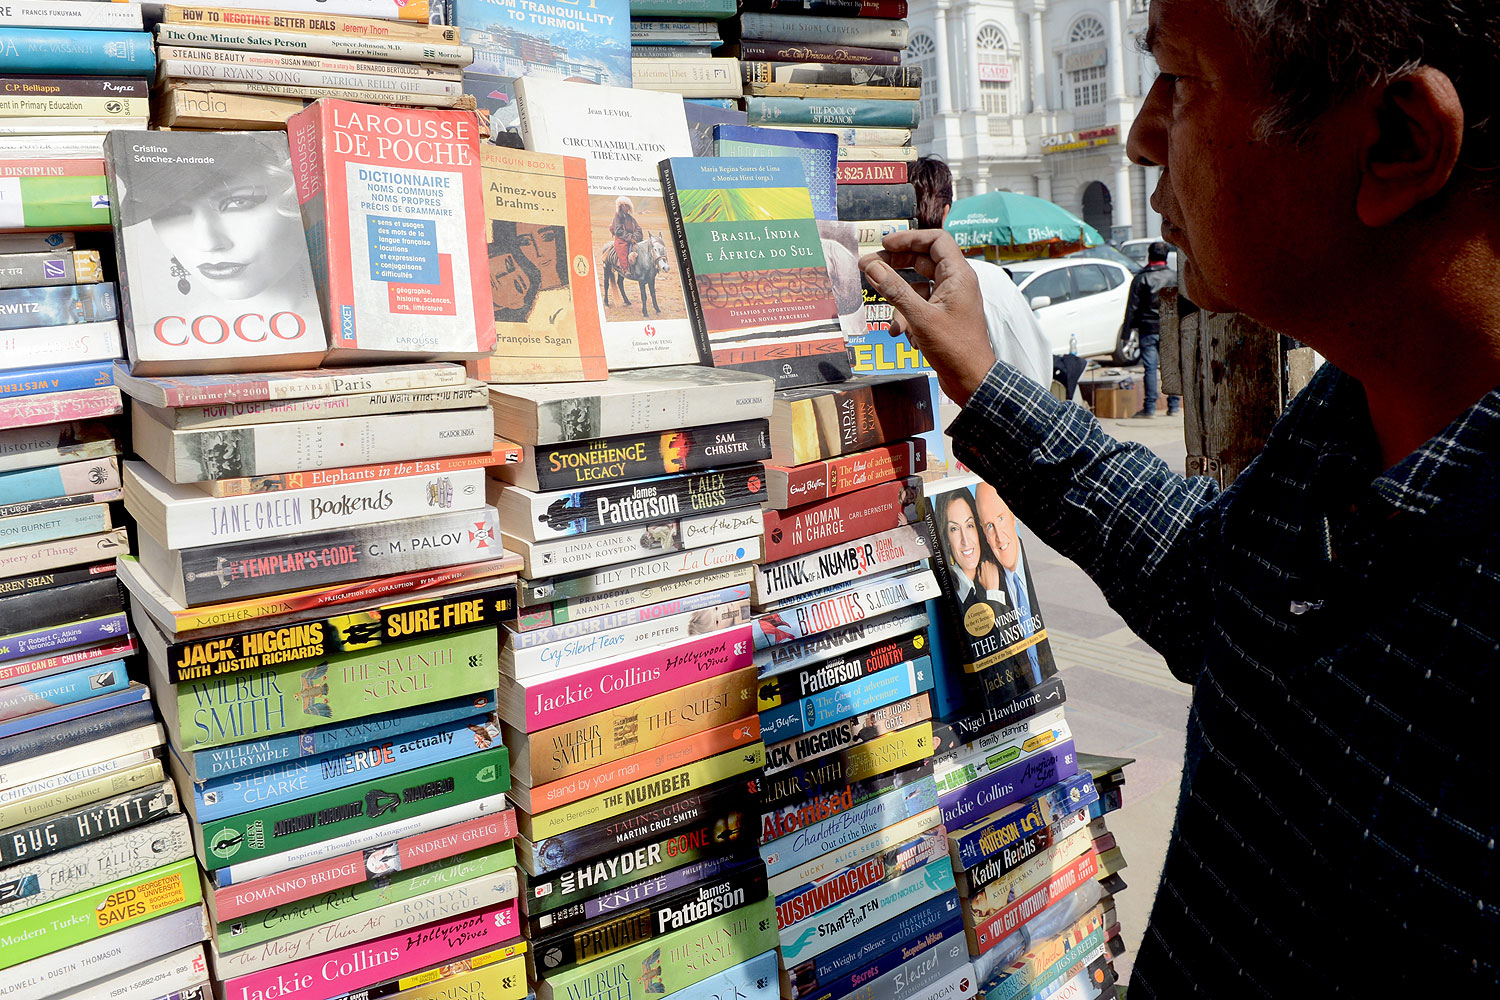 The decision by Penguin India to recall and pulp a scholarly work has many concerned over freedom of expression in India (Raveendran—AFP/Getty Images)